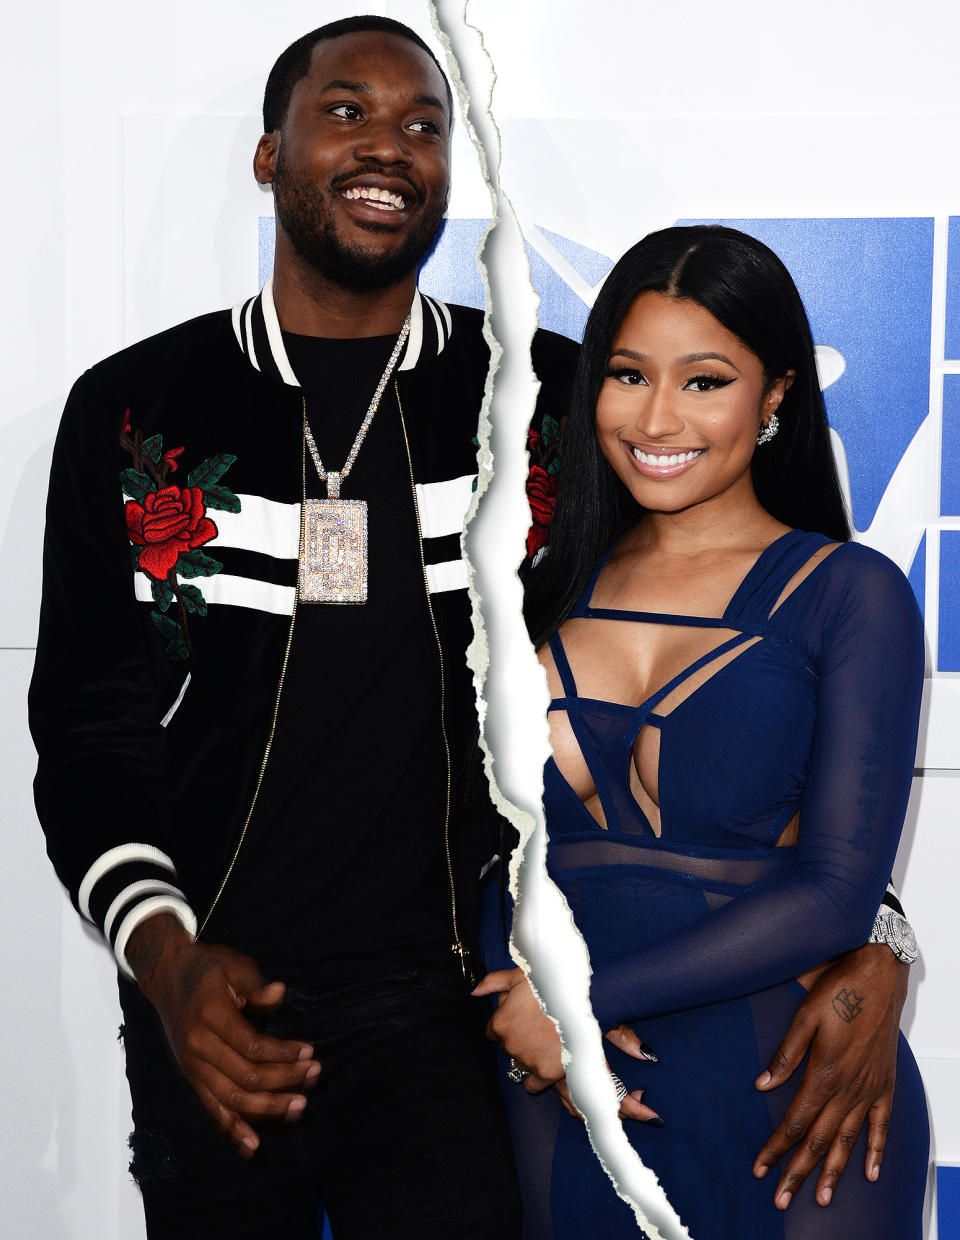 Minaj announced her breakup with Mill in January 2017 after nearly two years of dating.